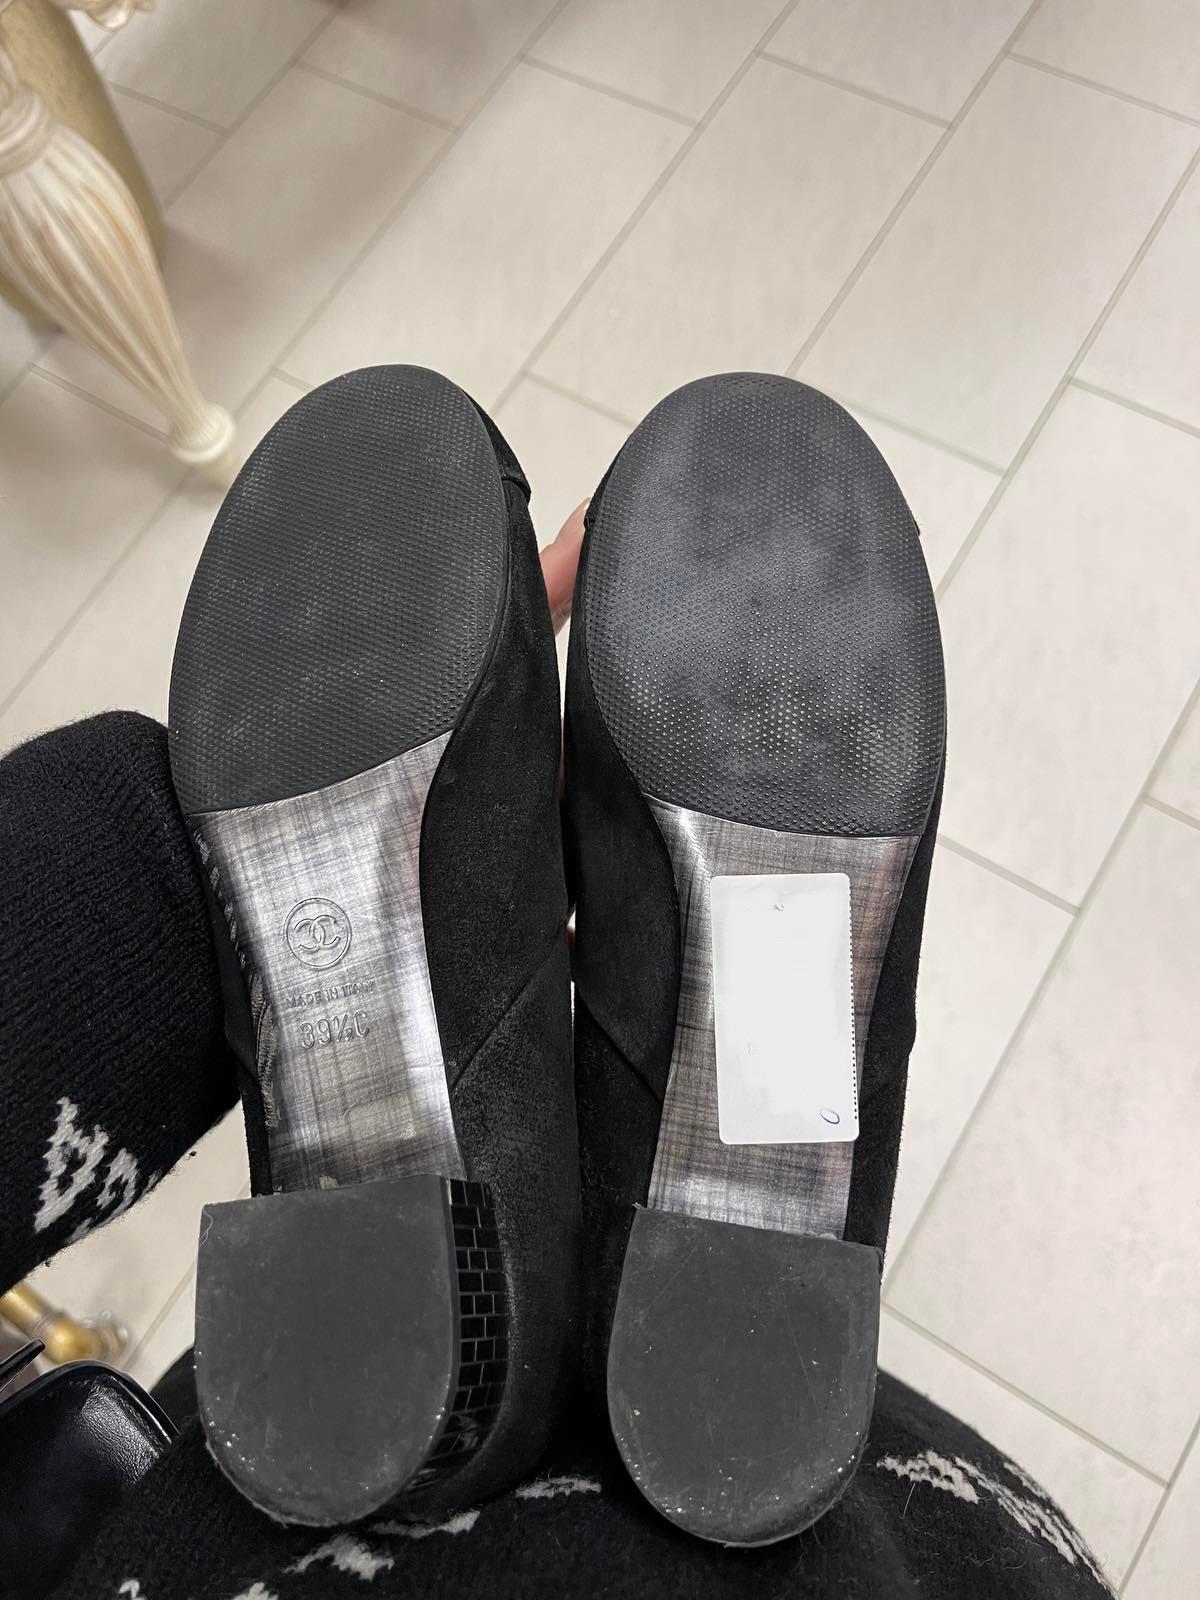 Chanel Suede Kidskin High Boots with 30mm Mirror Heel In Good Condition For Sale In Krakow, PL